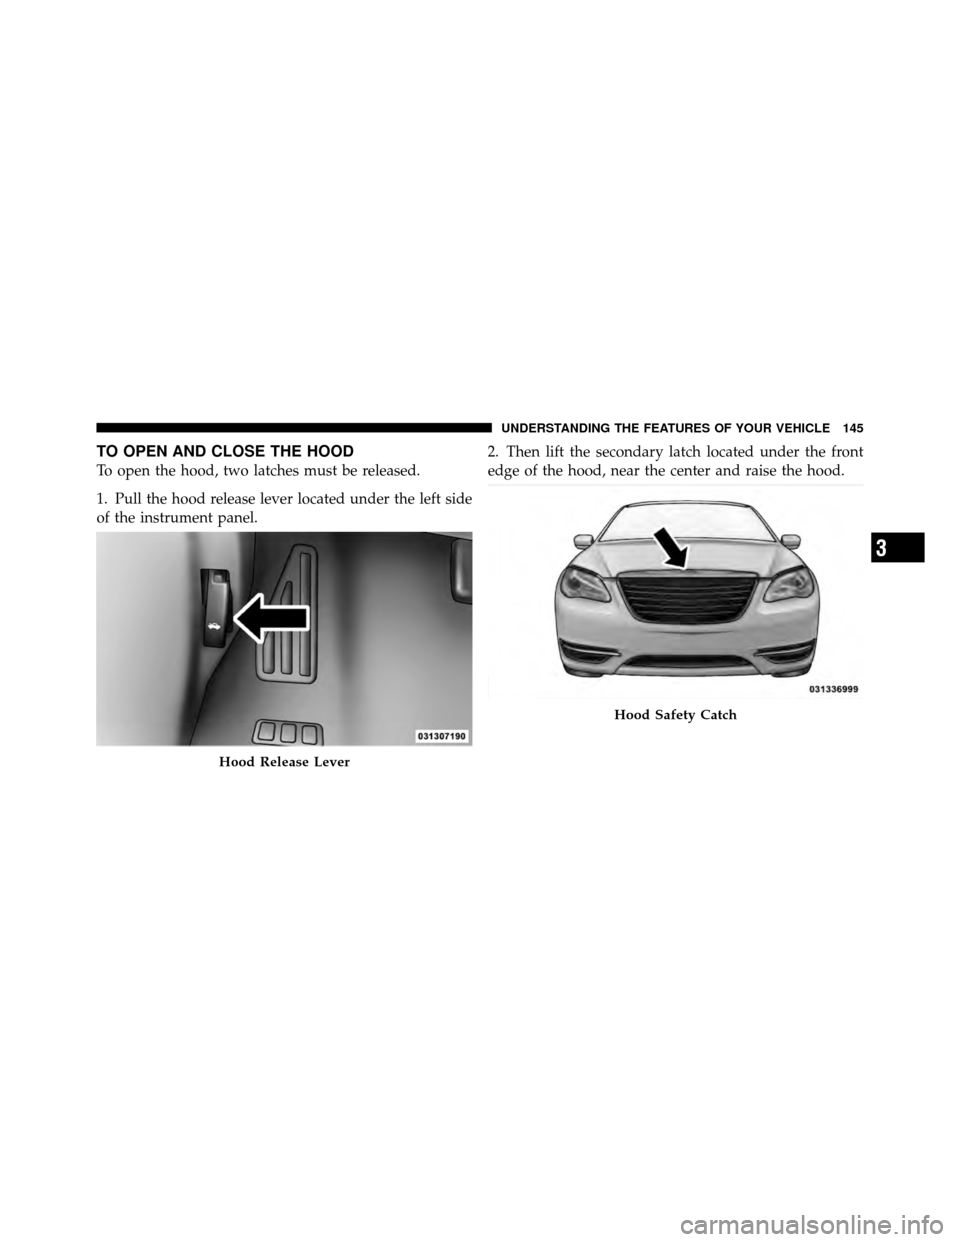 CHRYSLER 200 2011 1.G Owners Manual TO OPEN AND CLOSE THE HOOD
To open the hood, two latches must be released.
1. Pull the hood release lever located under the left side
of the instrument panel.2. Then lift the secondary latch located u